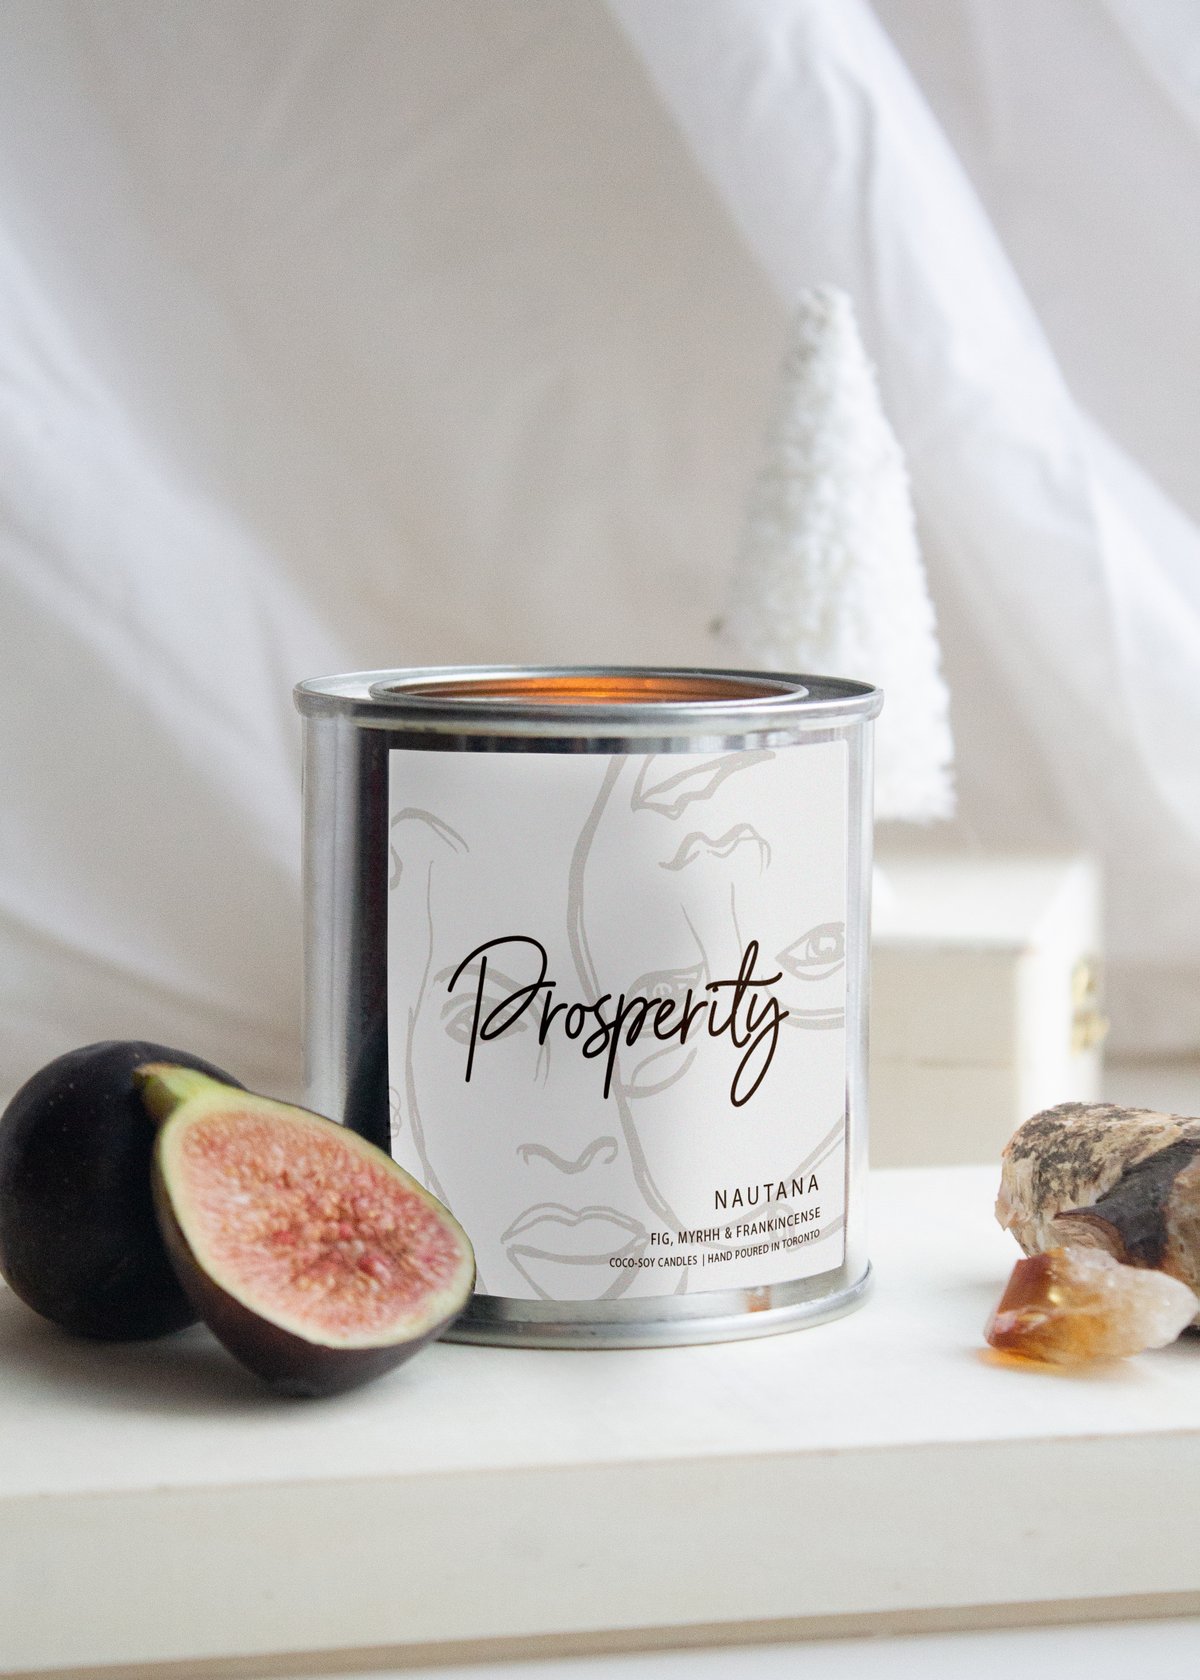 Prosperity - Fig, Amber & Frankincense Candle